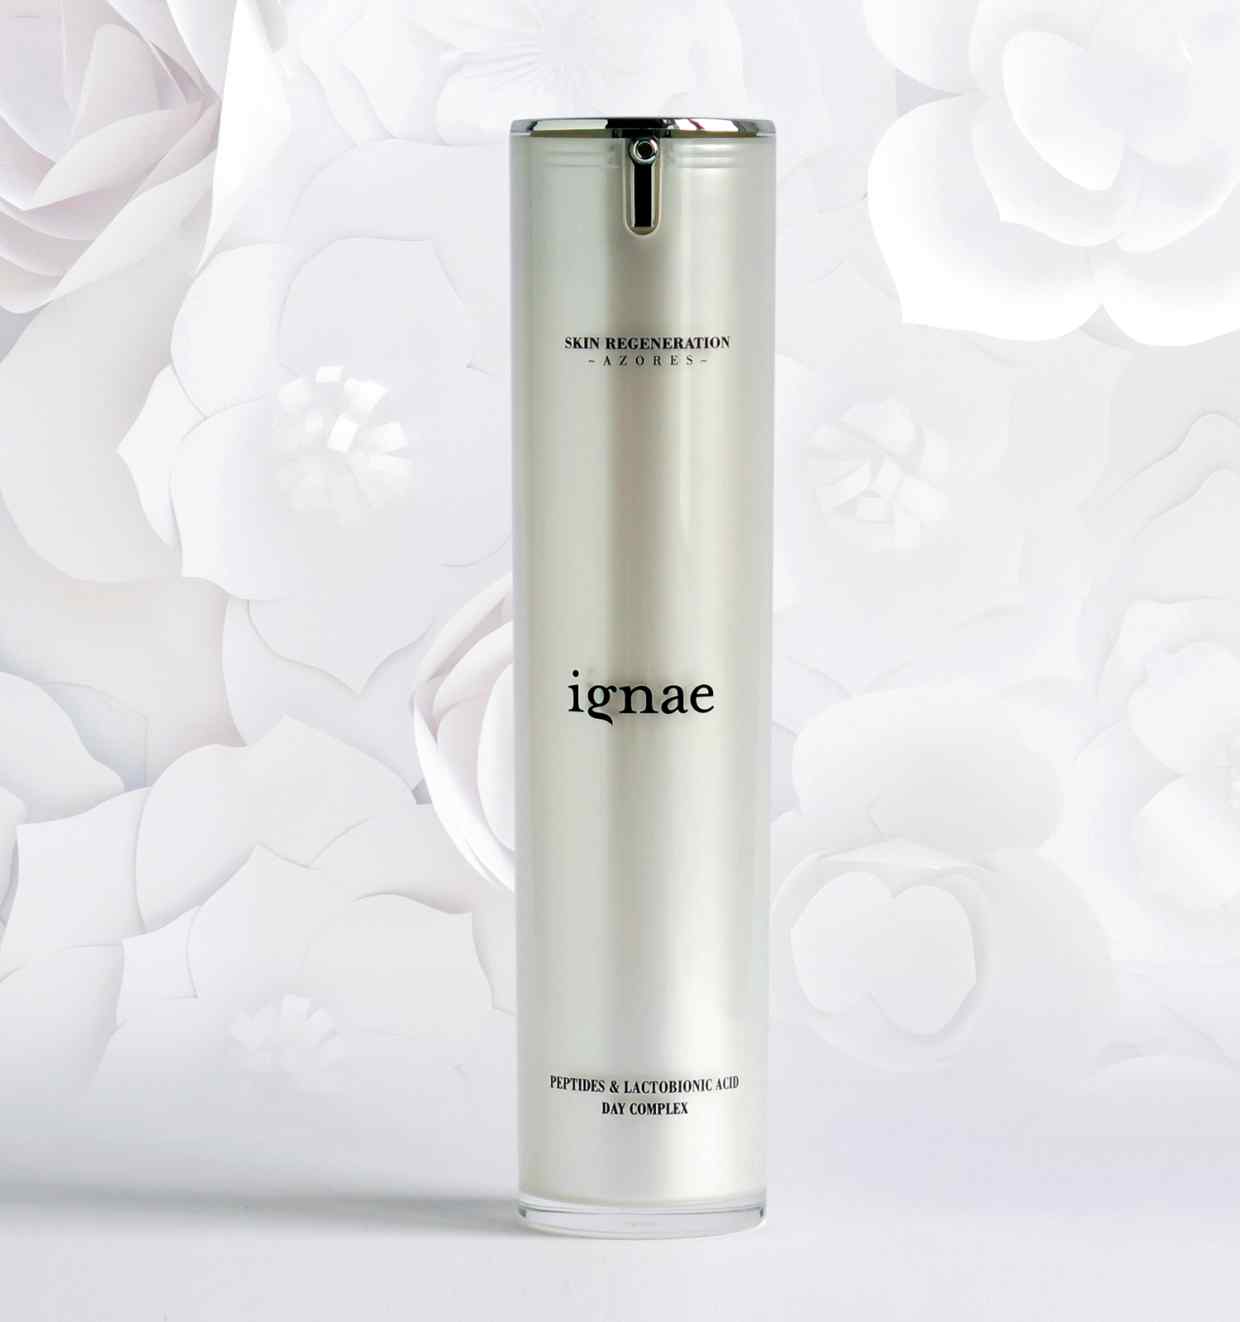 Ignae Day Complex, €115 for 50ml